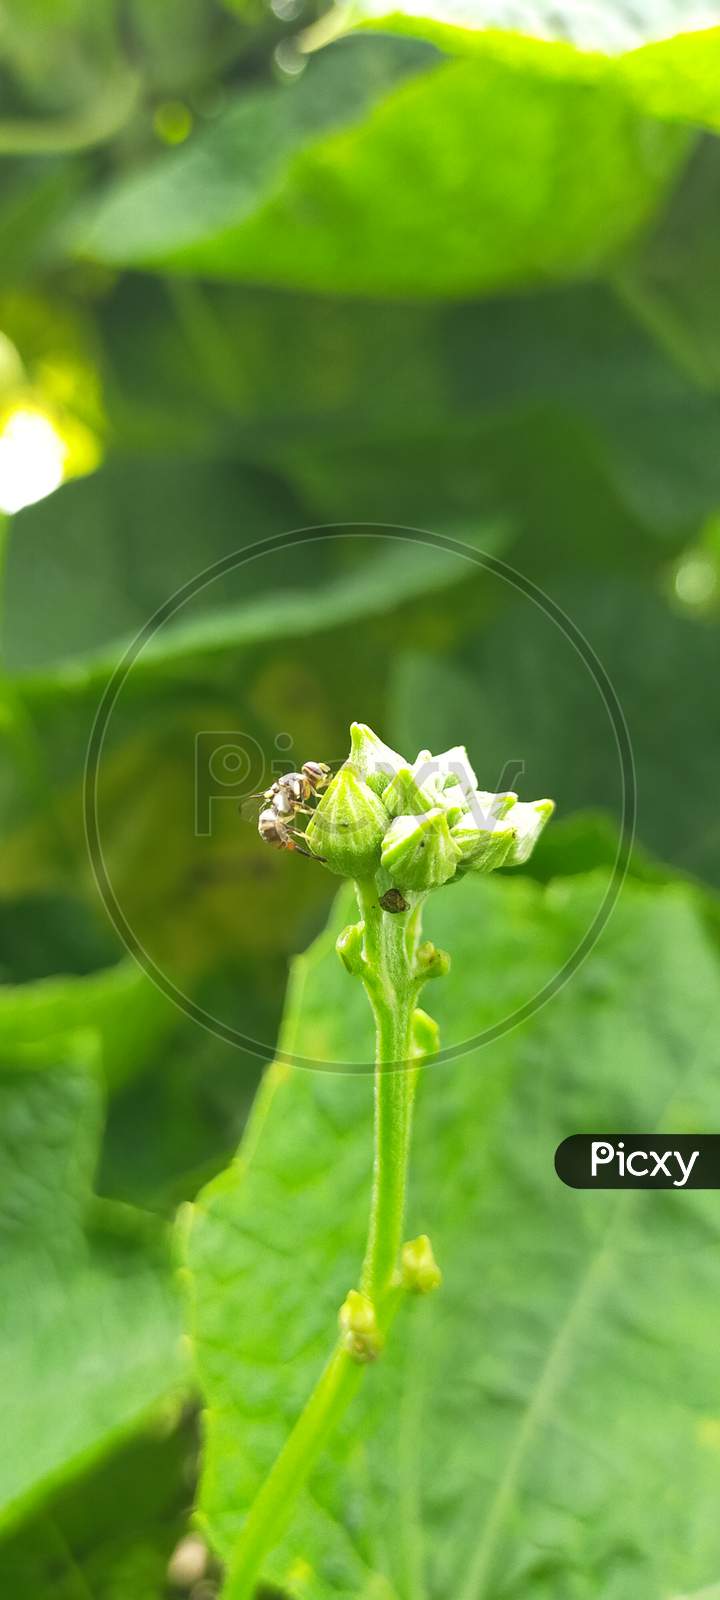 Insect on flower buds photography of insect and flower buds